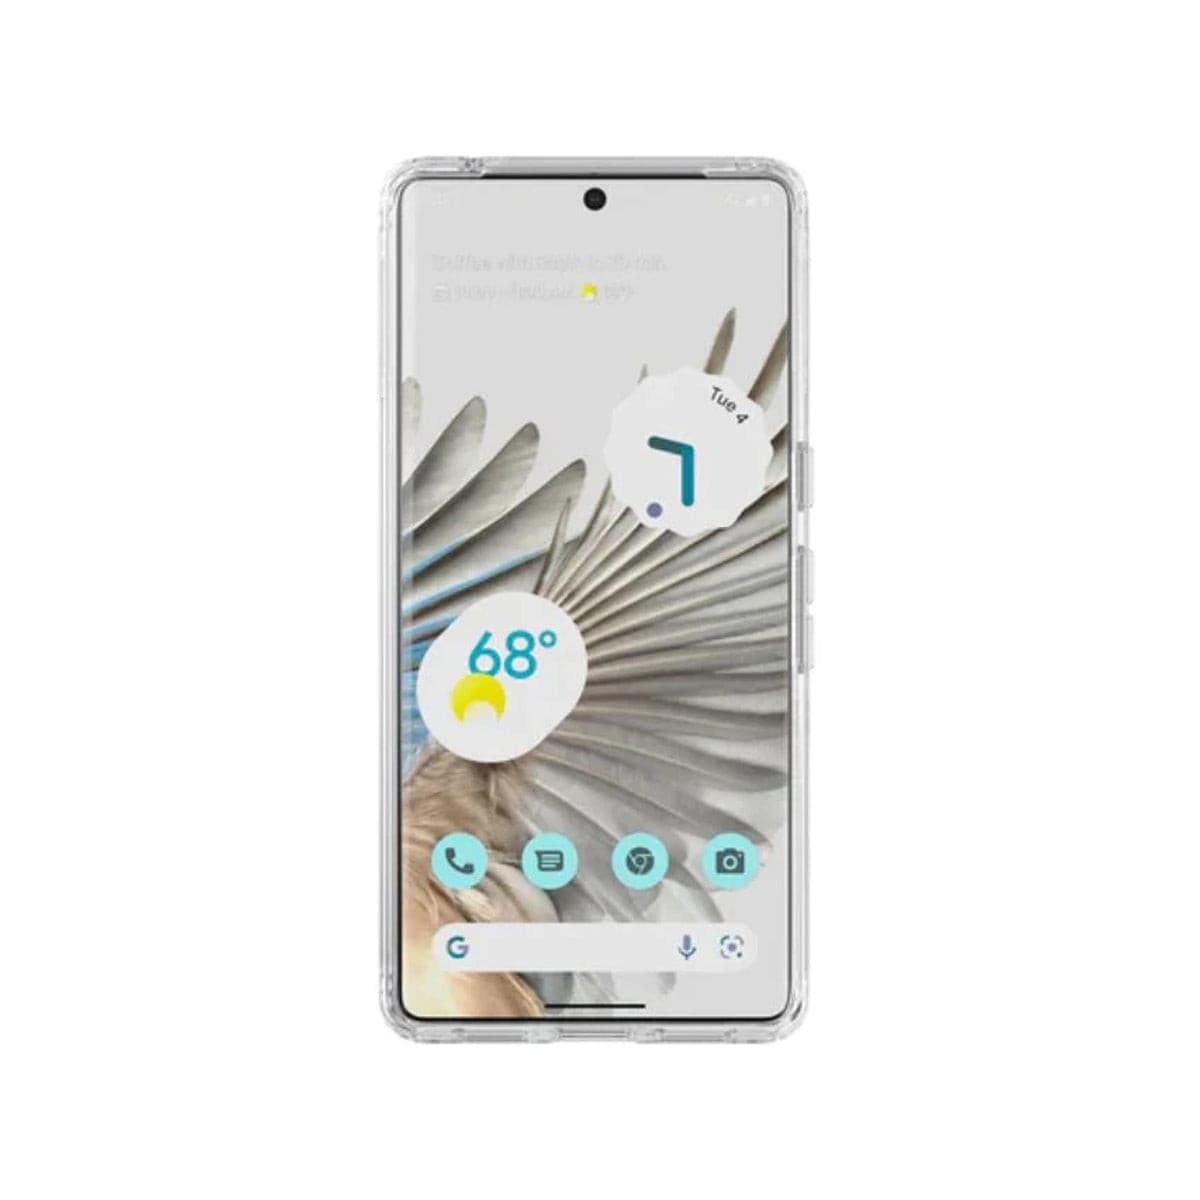 Tech21 EvoClear Phone Case for Pixel 7 Pro - Clear.